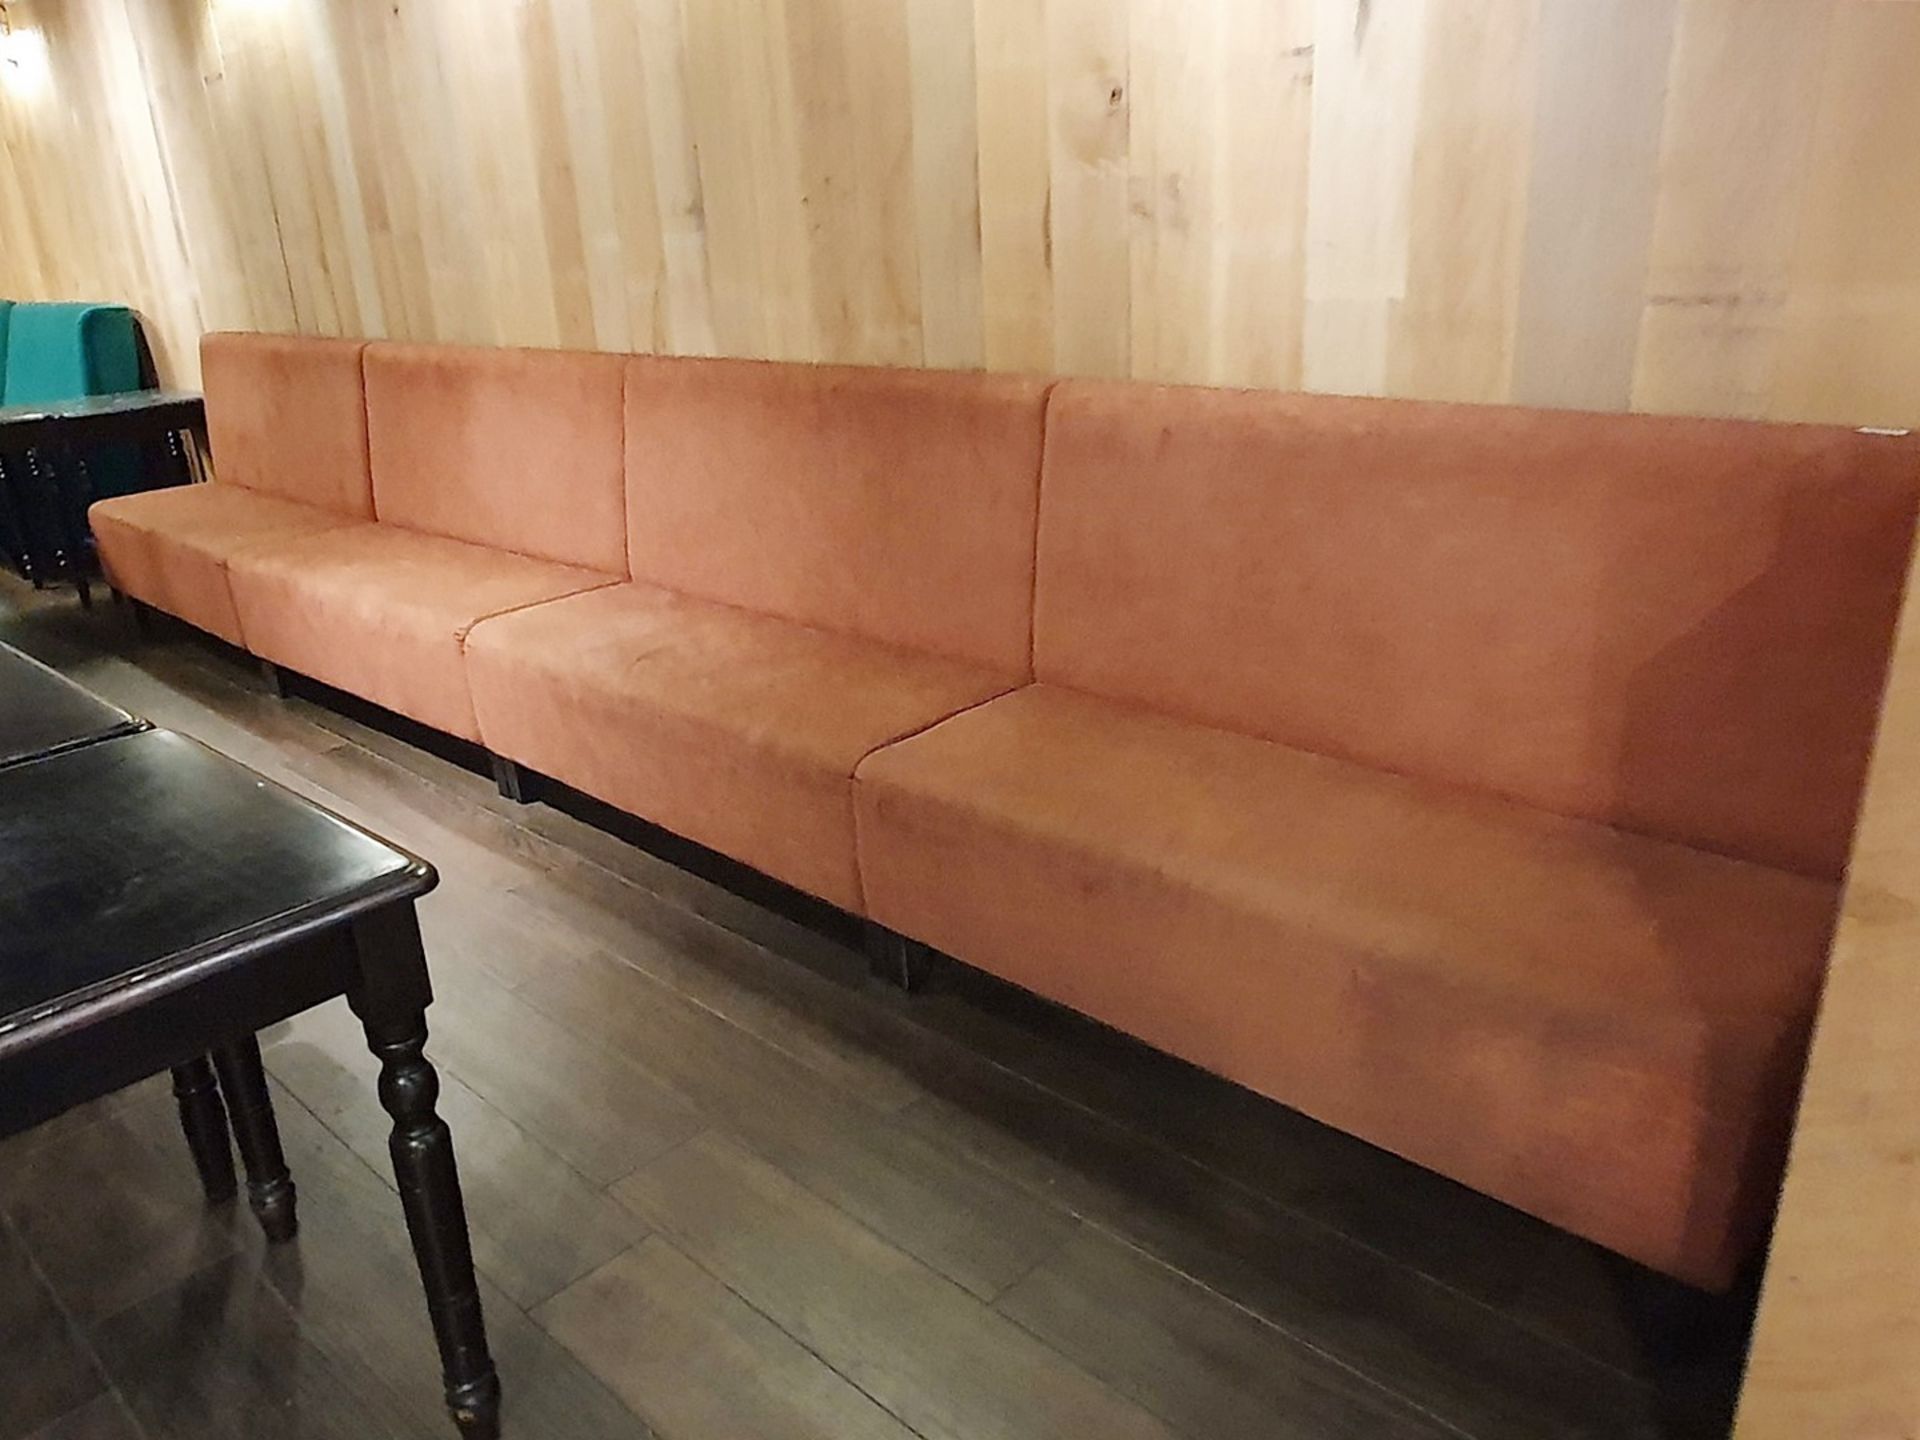 4 x Seating Benches Upholstered in a Hardwearing Salmon Fabric - Dimensions of Each H46/100 x W137 x